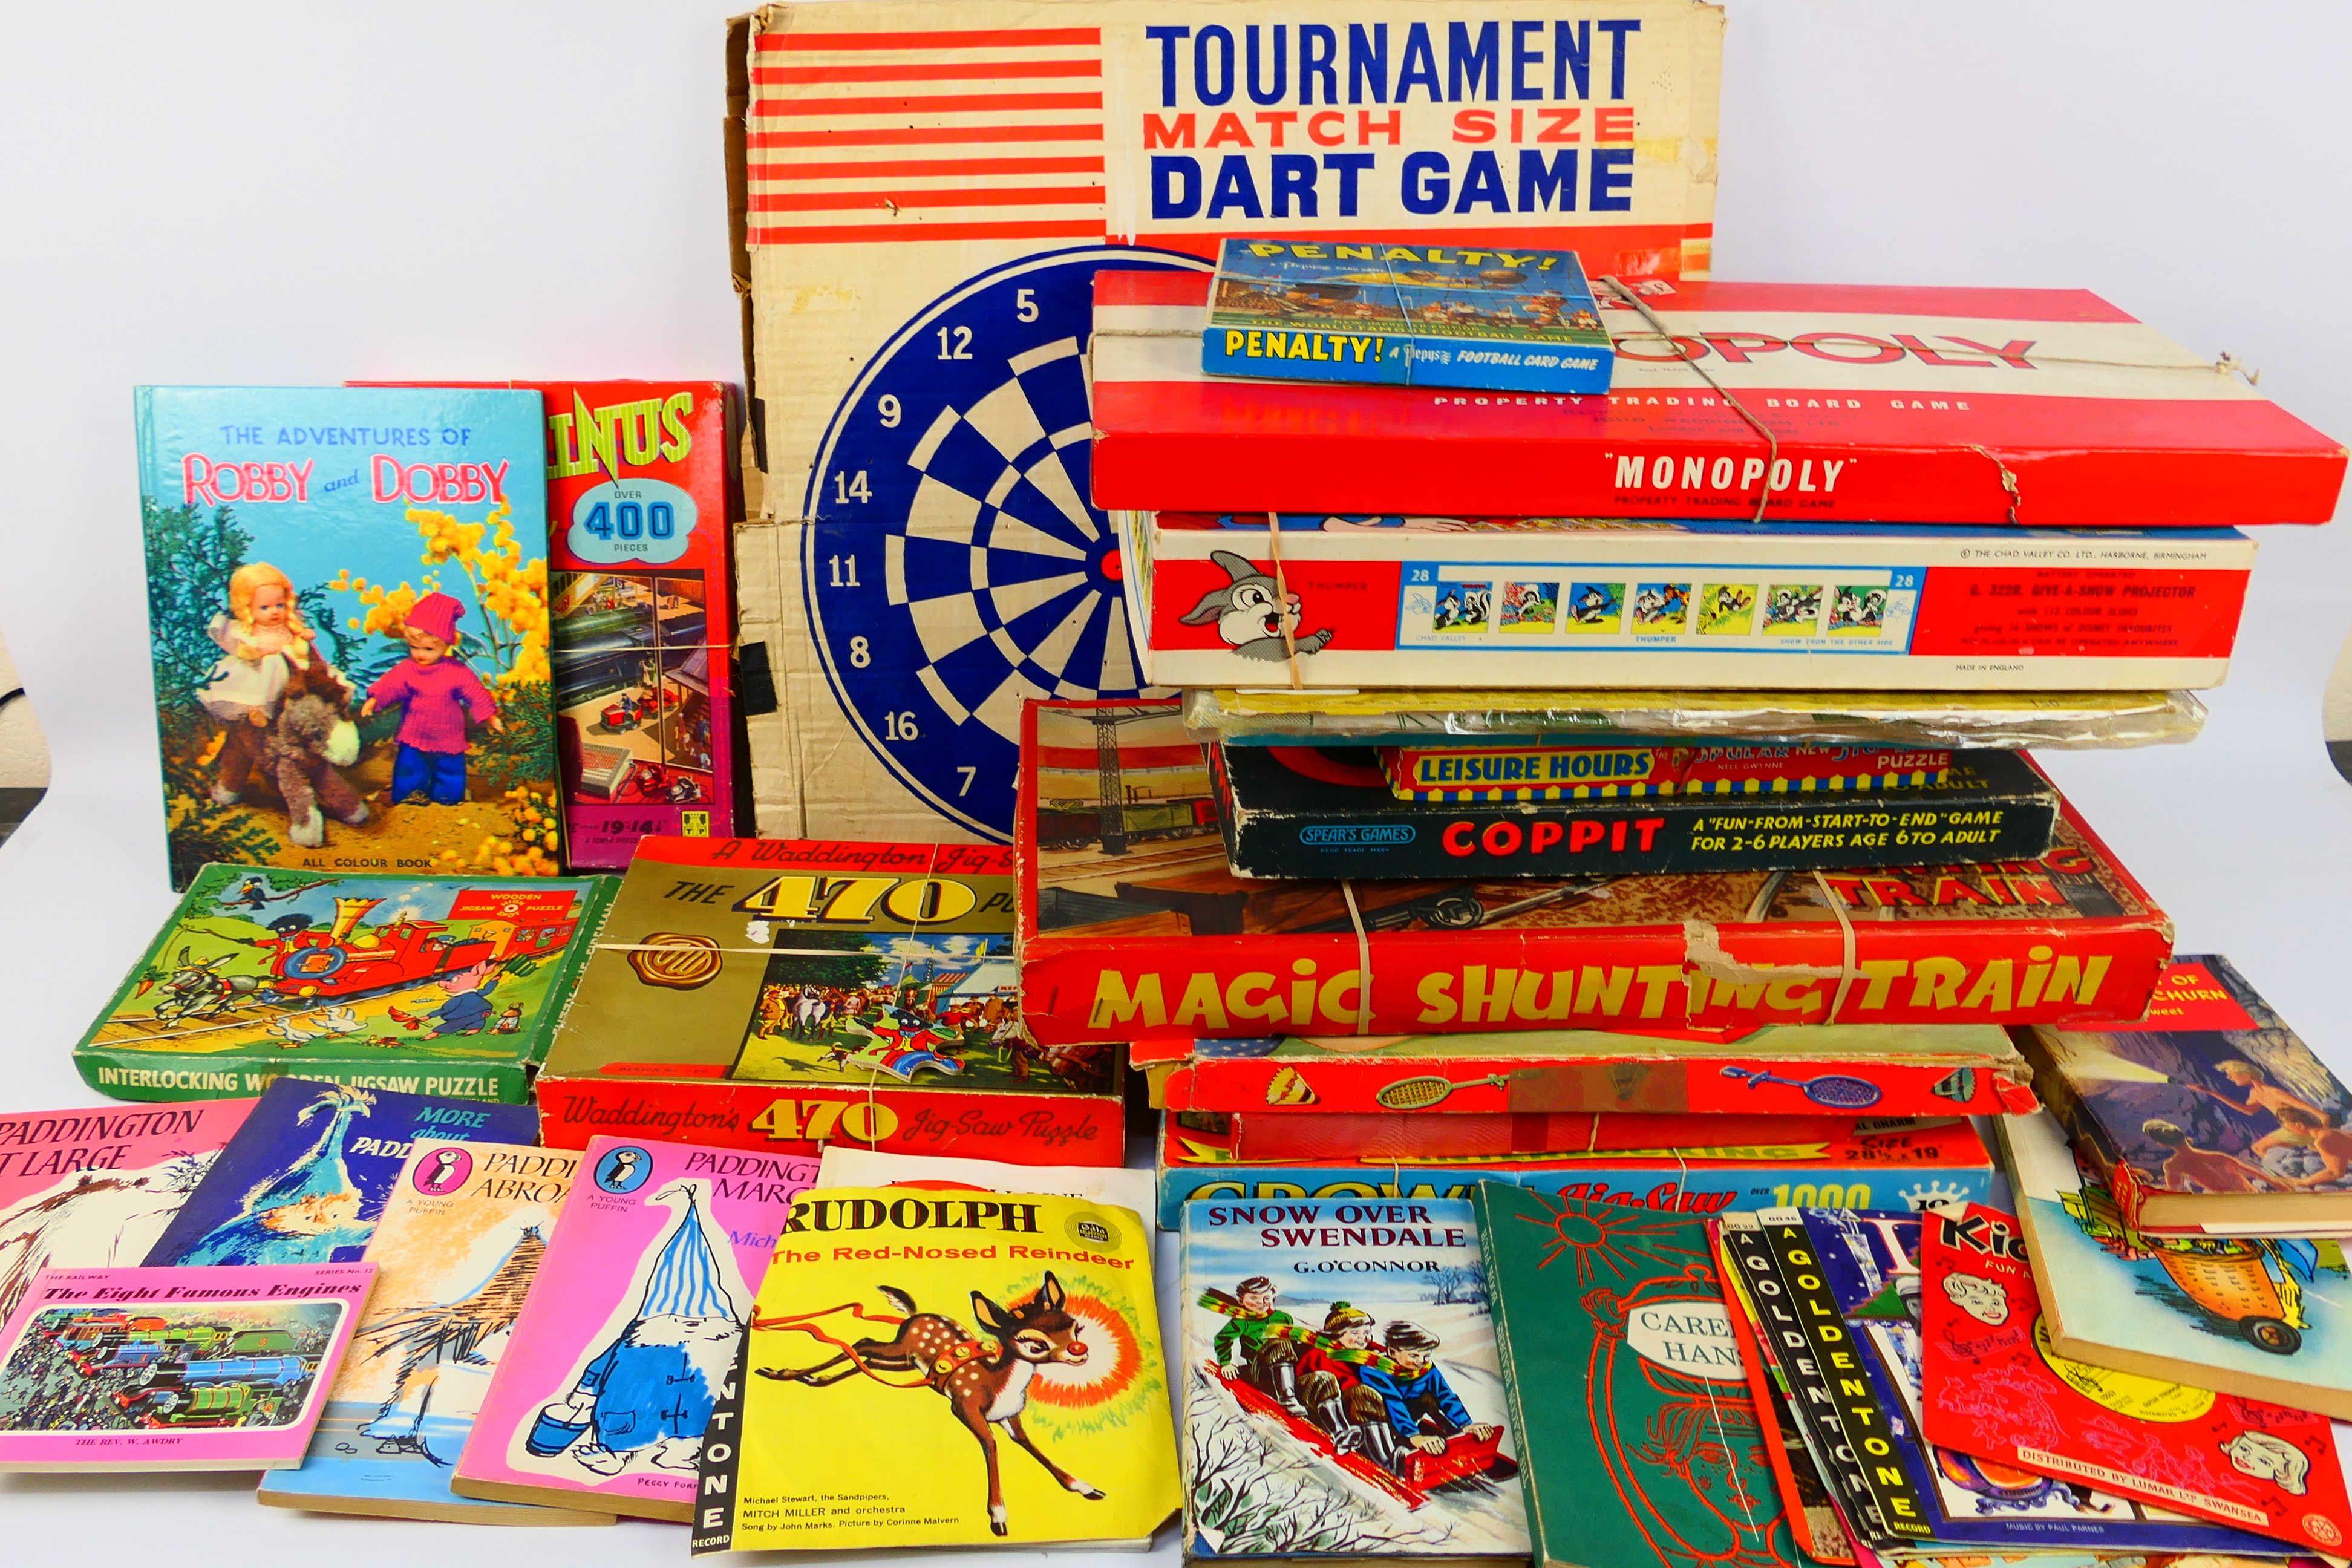 Waddington, TP, Chad Valley, Monopoly, Spear's Games - 13 x vintage boxed Jigsaws, games, books,